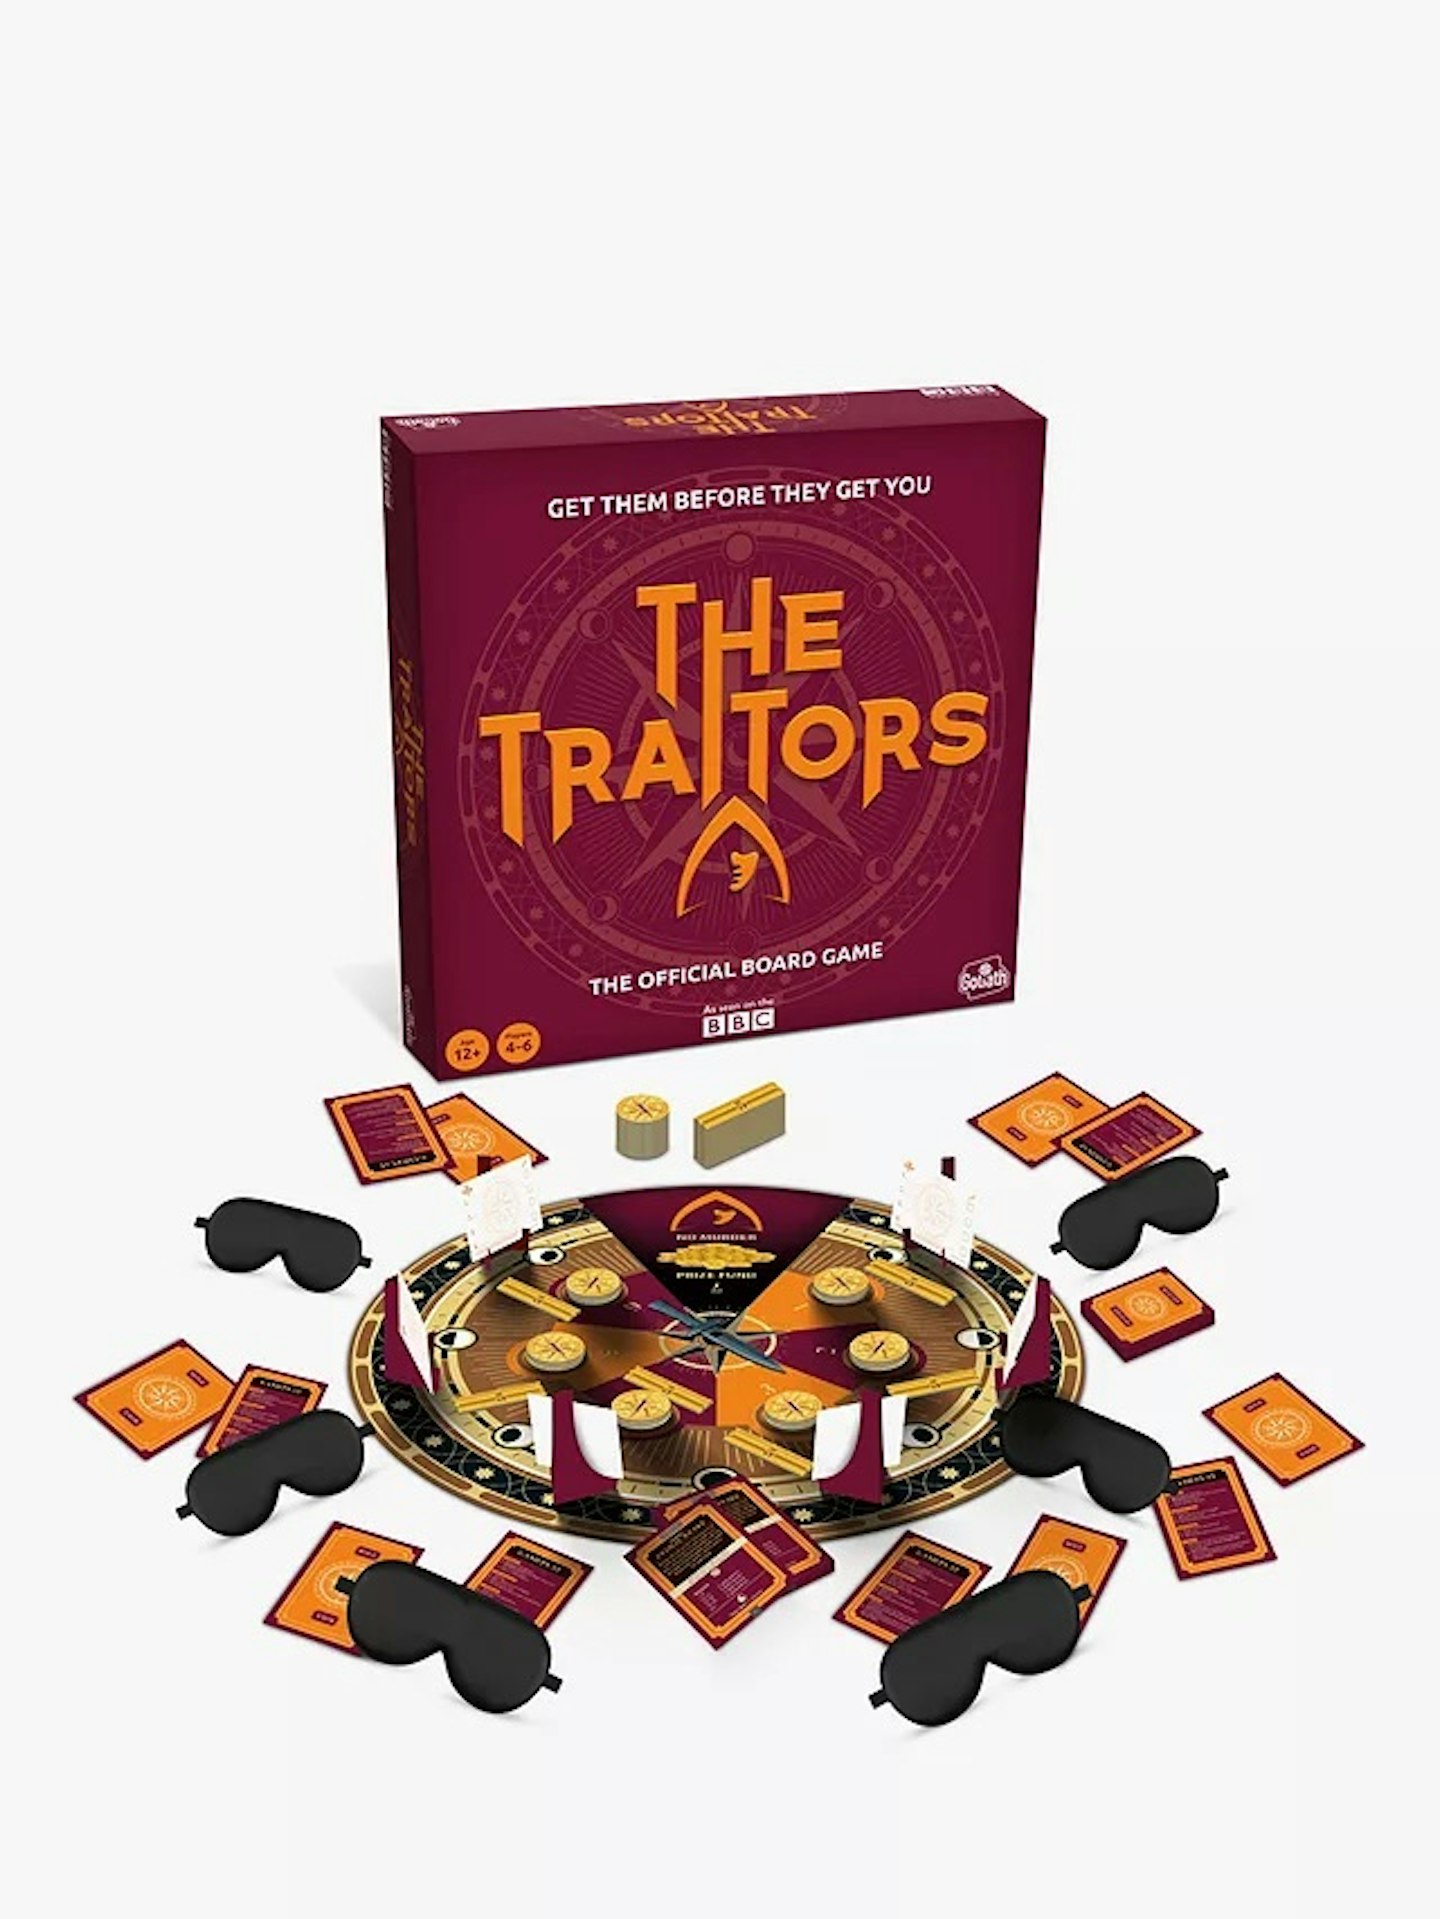 The Traitors Official Board Game